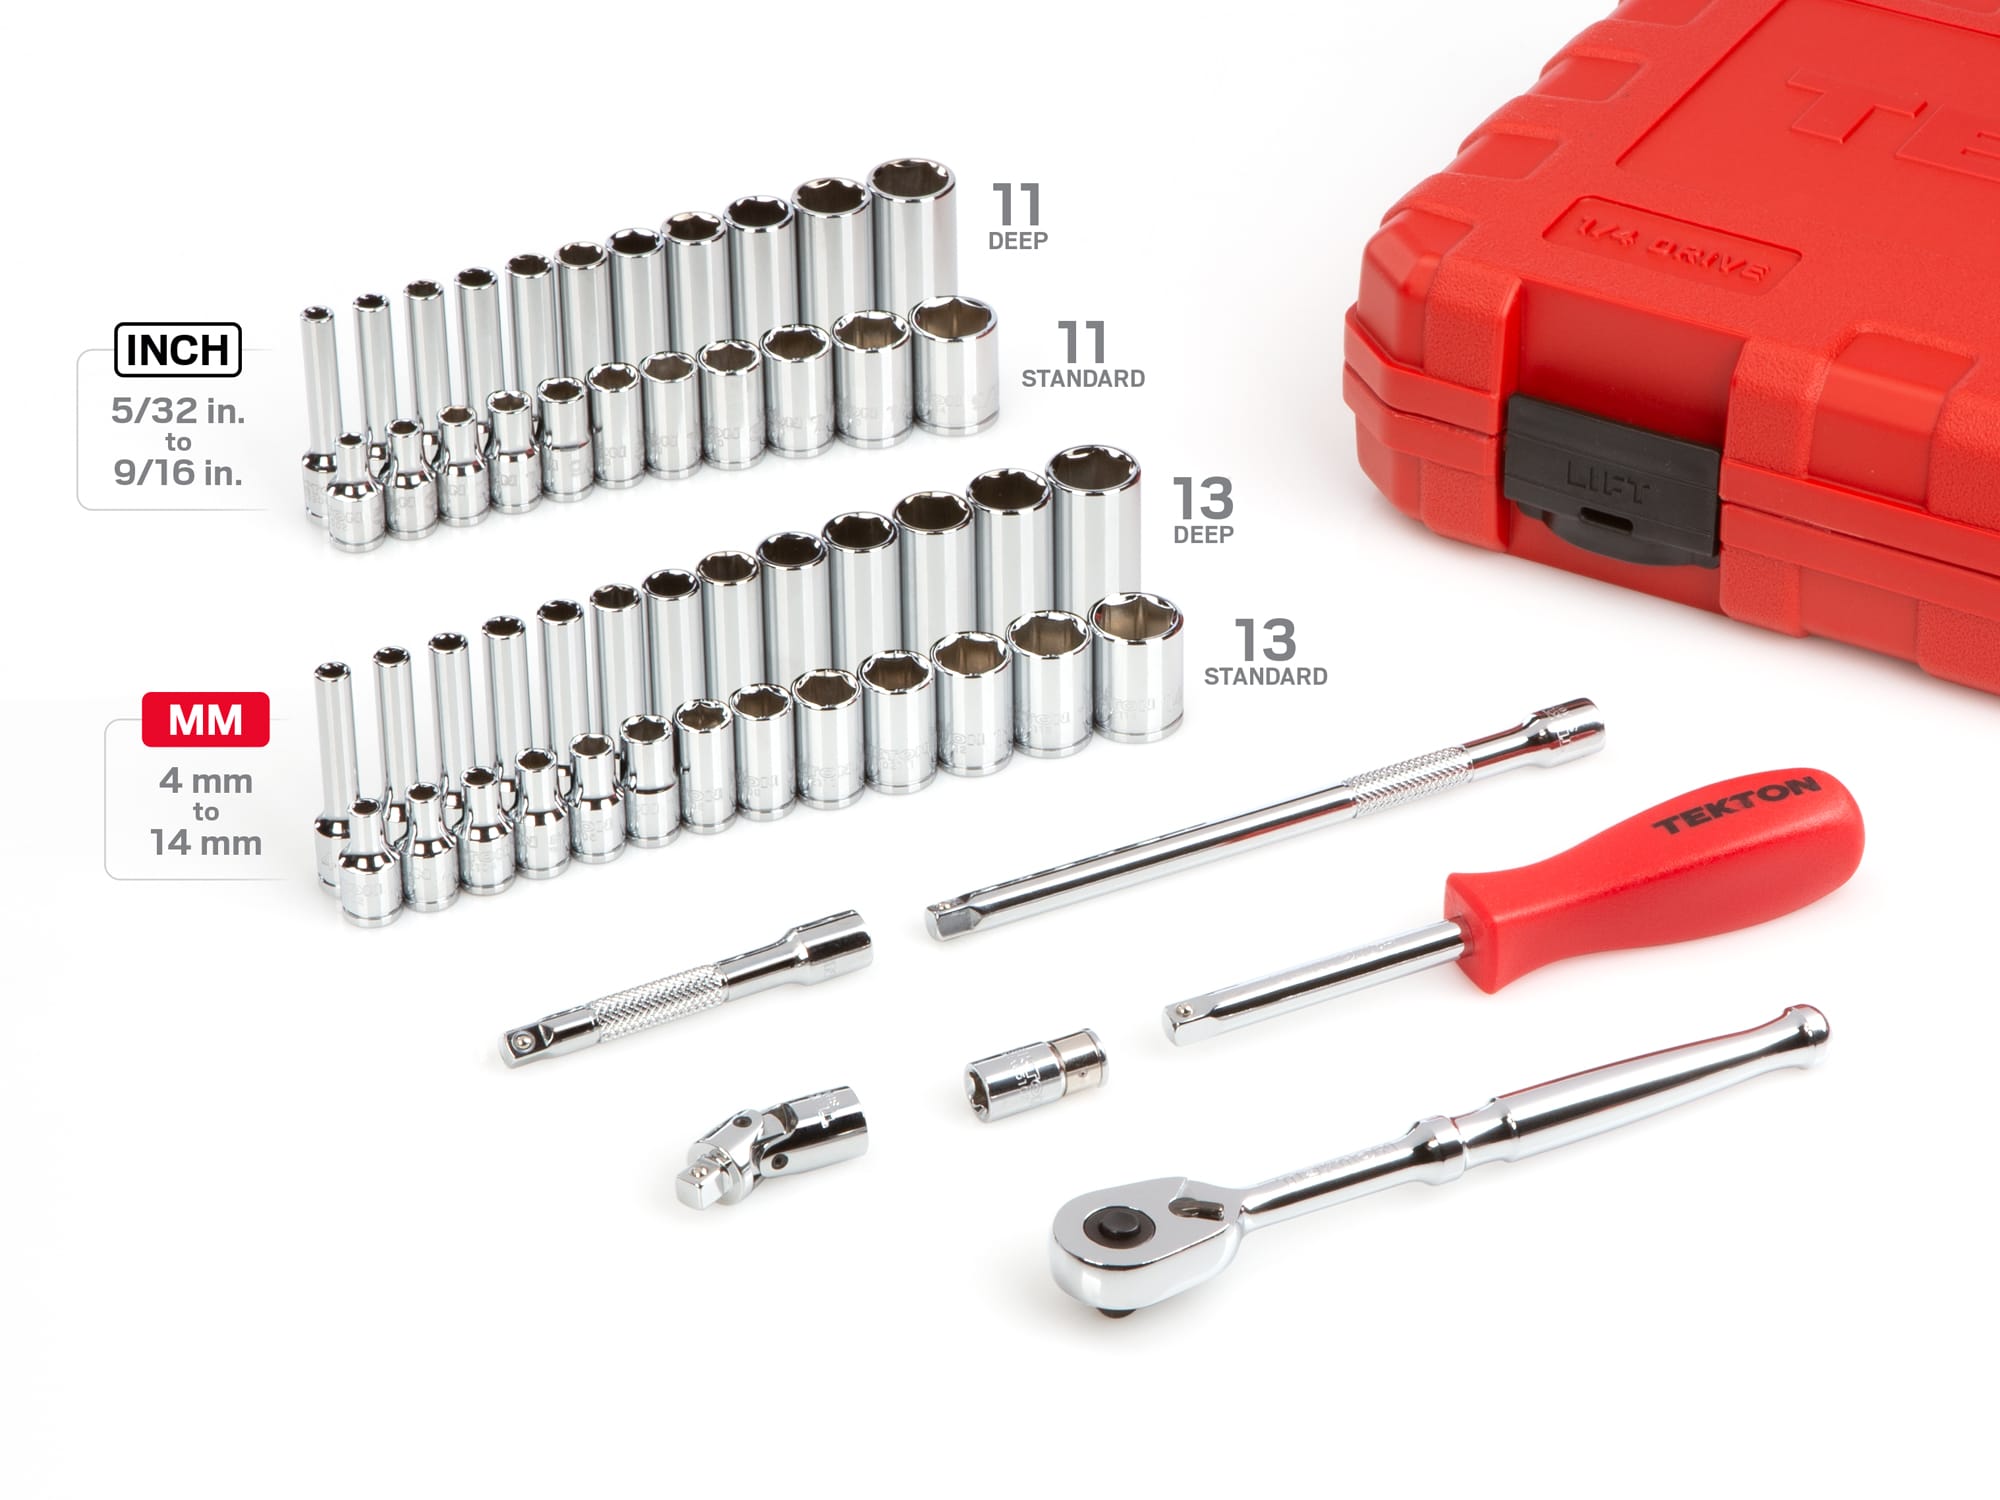 1/4 Inch Drive 6-Point Socket and Ratchet Set, 55-Piece (5/32-9/16 in.,  4-14mm)